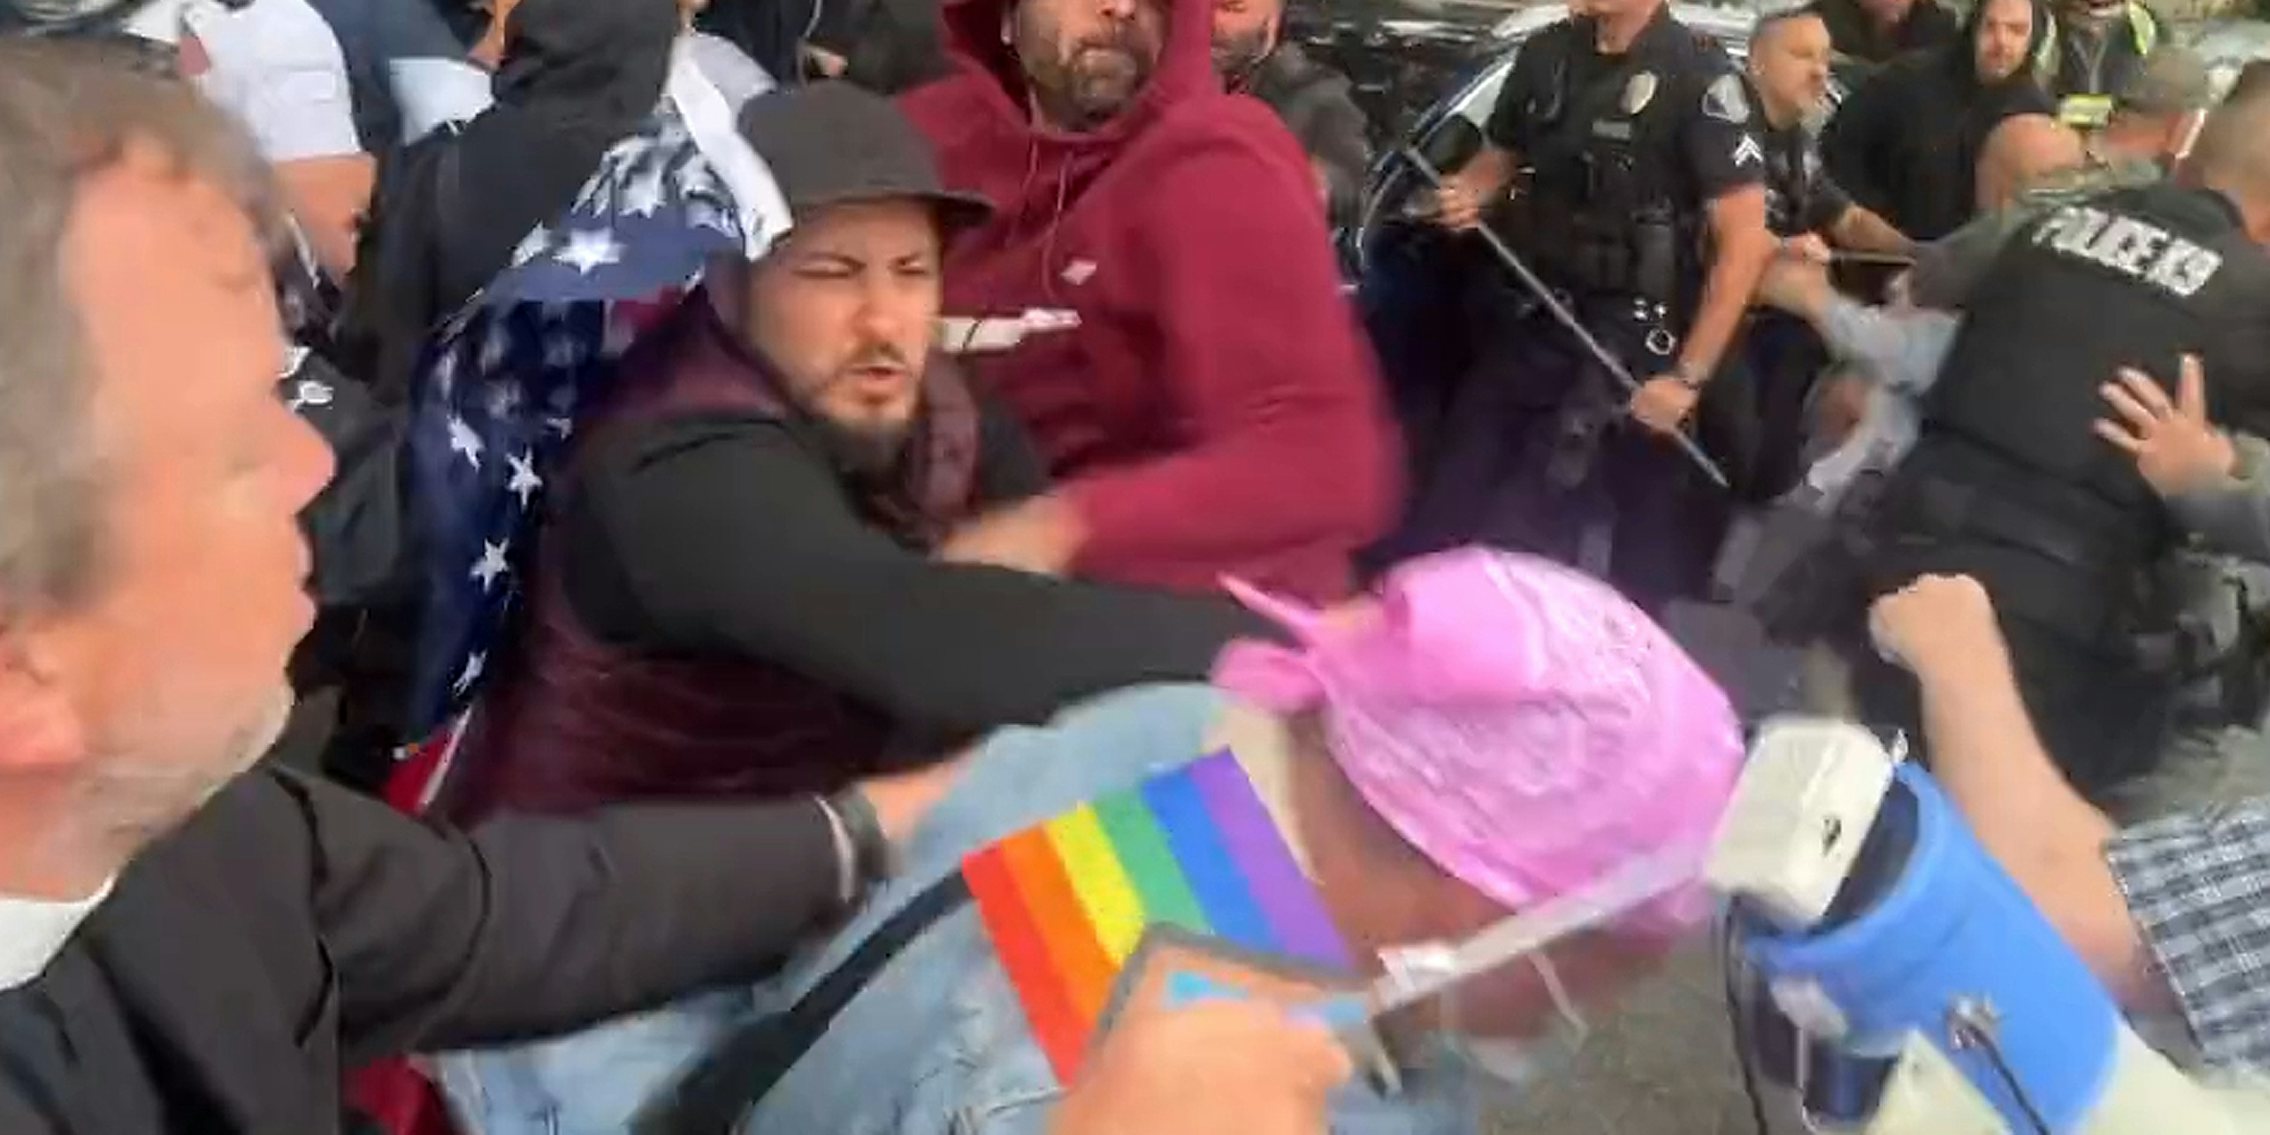 man with American flag punching person with Pride flag in Glendale Pride fight